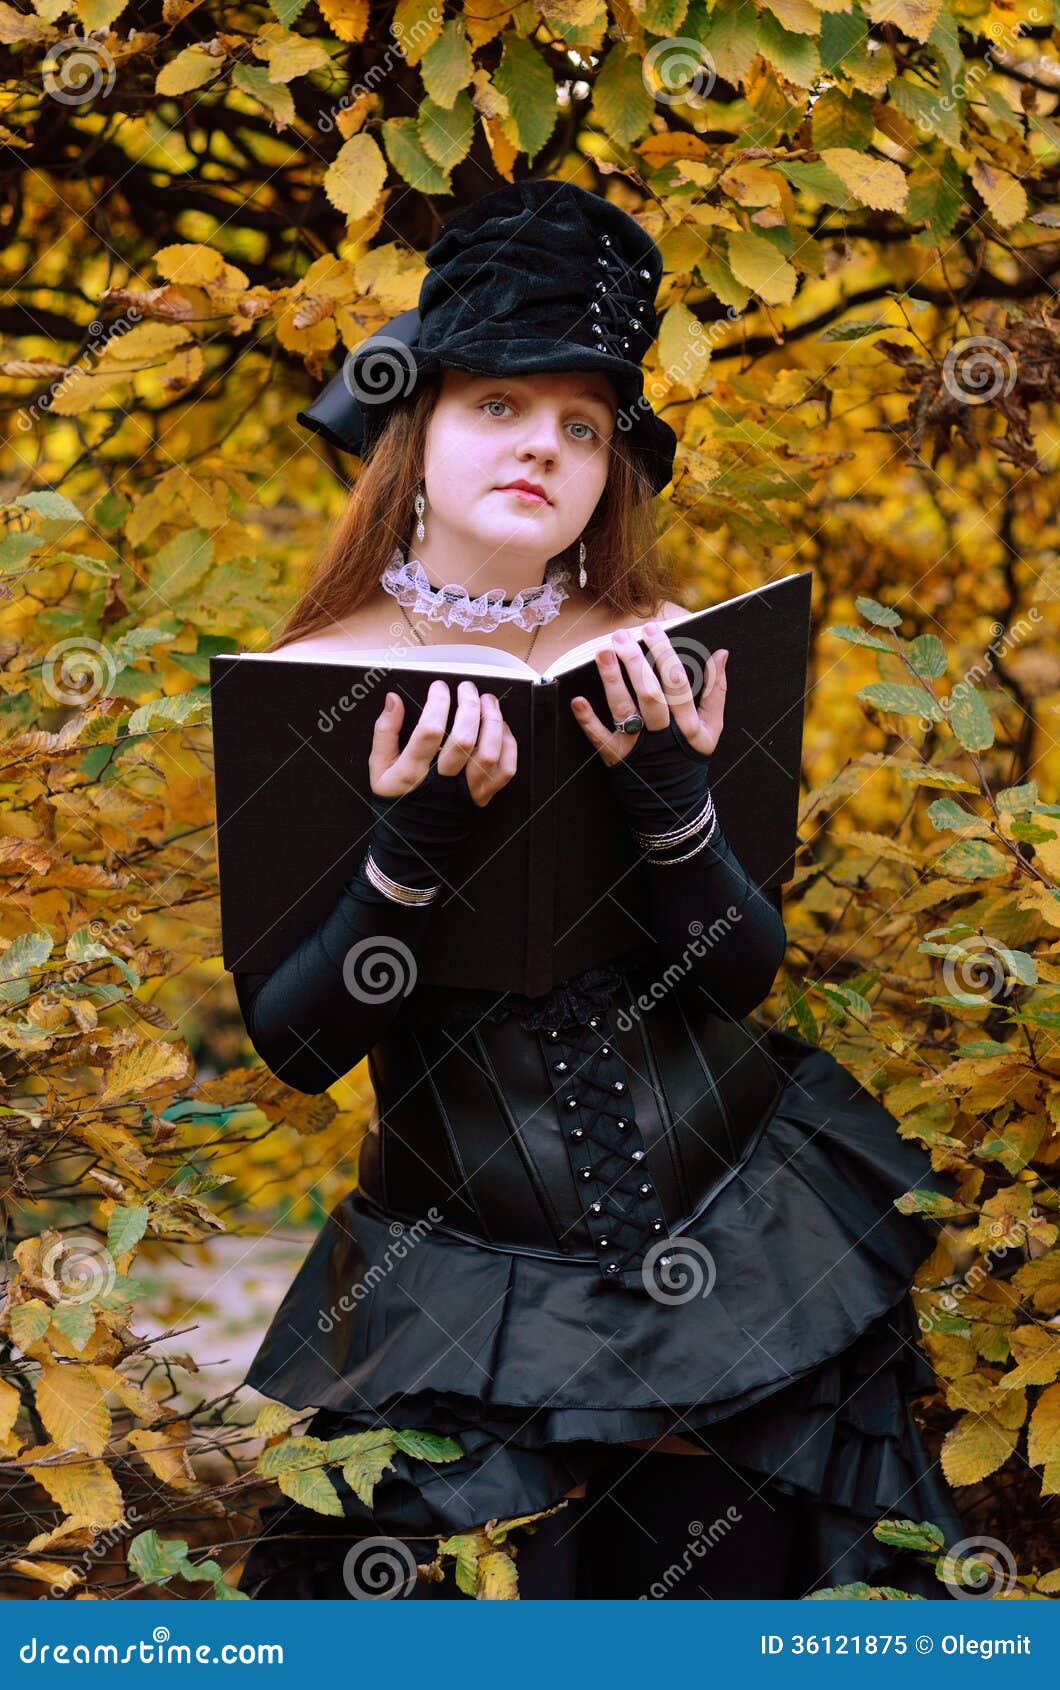 Cosplayer with a Book in the Autumn Park Stock Image - Image of stage, girl:  36121875